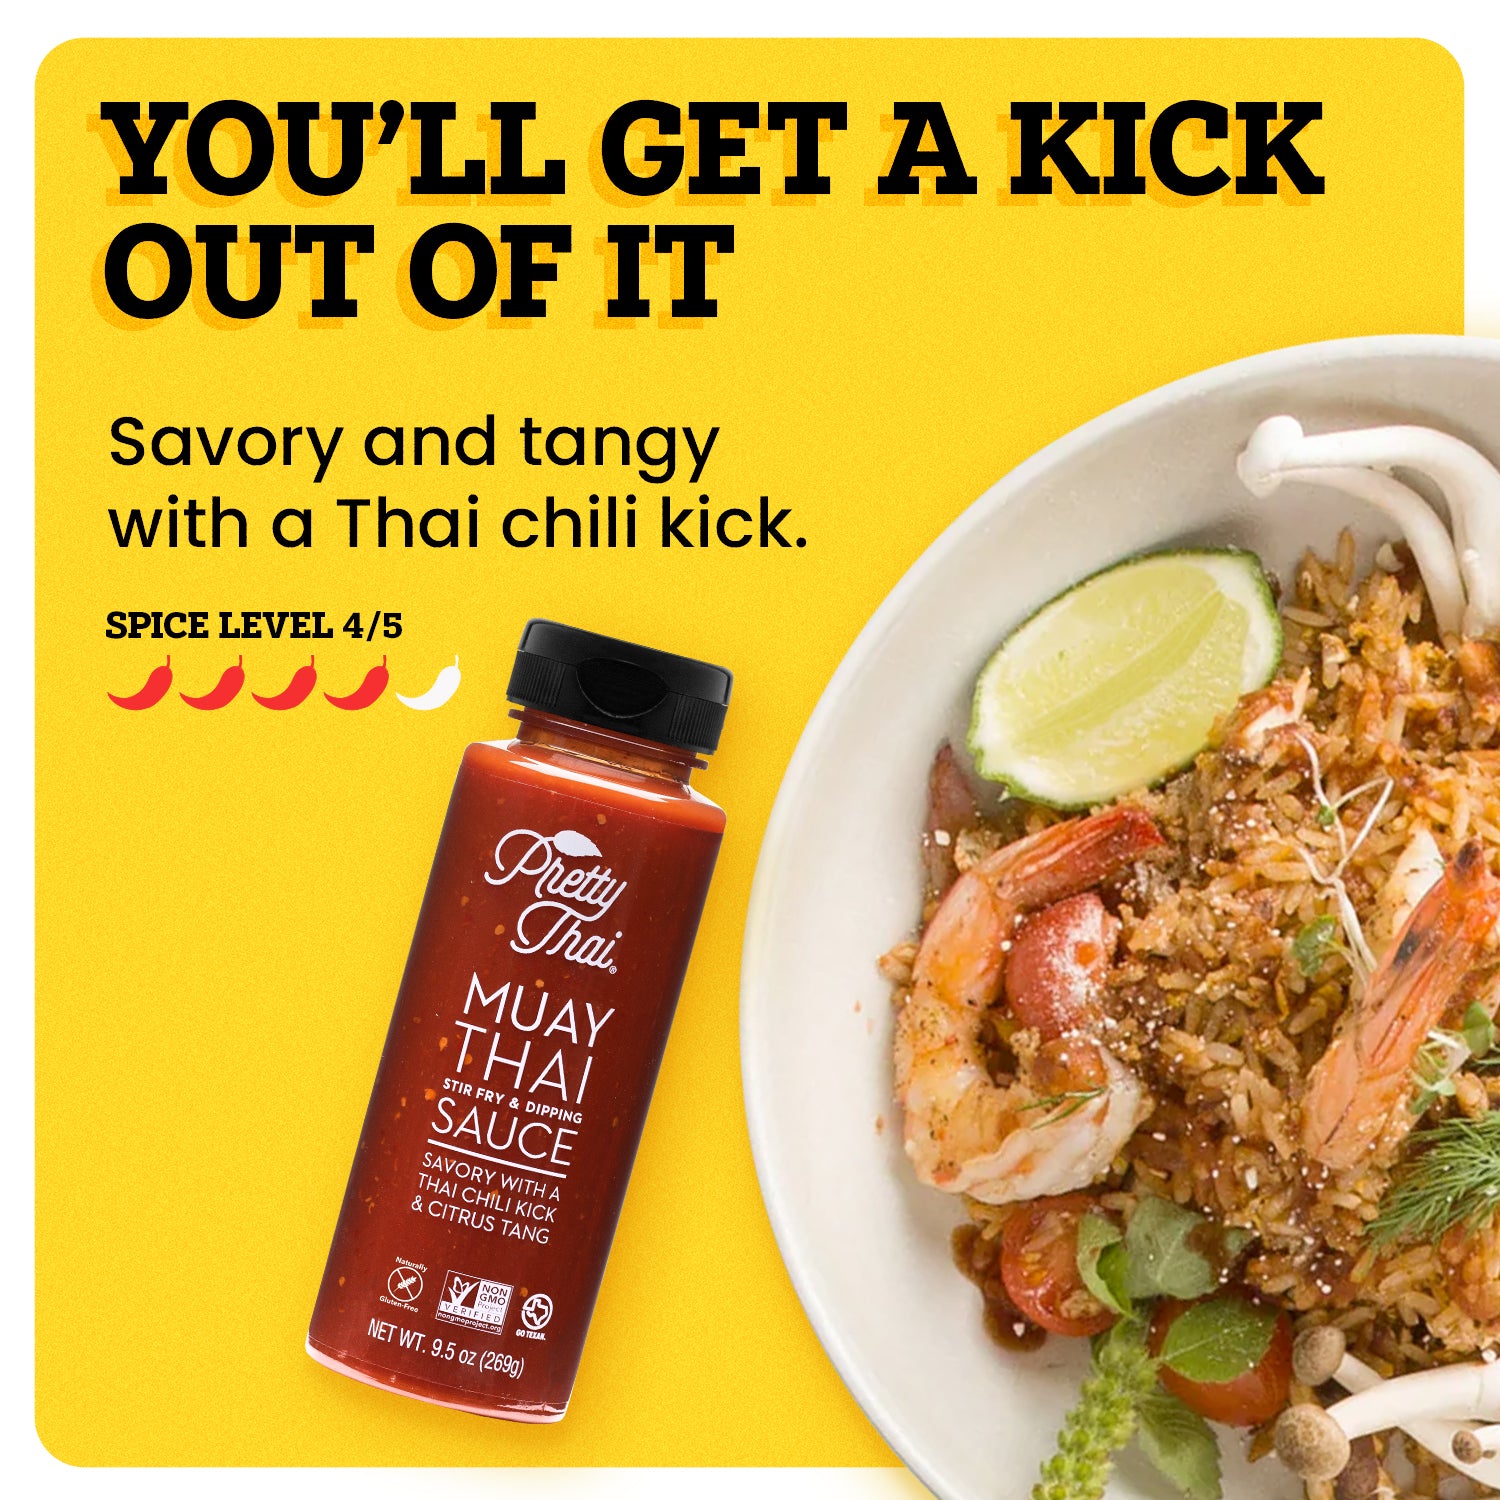 A bottle of Pretty Thai Muay Thai Stir Fry and dipping Sauce, which has savory with a thai chili kick and citrus tang. Net WT. 9.5 0z (269 g) is also written on it under different labels. In the background, different vegetables can be seen. 